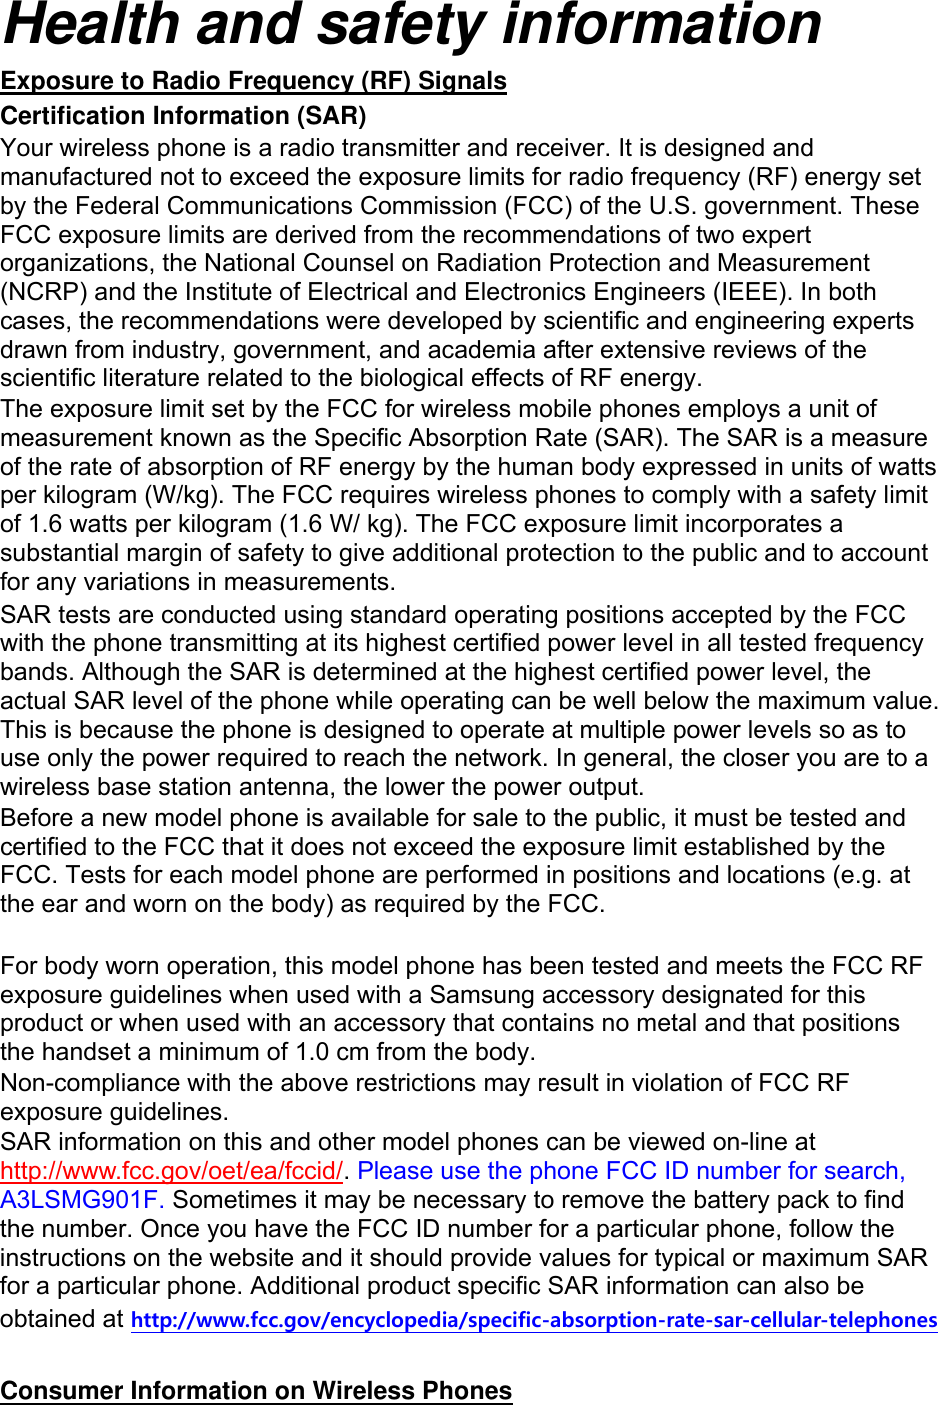 Health and safety information Exposure to Radio Frequency (RF) Signals Certification Information (SAR) Your wireless phone is a radio transmitter and receiver. It is designed and manufactured not to exceed the exposure limits for radio frequency (RF) energy set by the Federal Communications Commission (FCC) of the U.S. government. These FCC exposure limits are derived from the recommendations of two expert organizations, the National Counsel on Radiation Protection and Measurement (NCRP) and the Institute of Electrical and Electronics Engineers (IEEE). In both cases, the recommendations were developed by scientific and engineering experts drawn from industry, government, and academia after extensive reviews of the scientific literature related to the biological effects of RF energy. The exposure limit set by the FCC for wireless mobile phones employs a unit of measurement known as the Specific Absorption Rate (SAR). The SAR is a measure of the rate of absorption of RF energy by the human body expressed in units of watts per kilogram (W/kg). The FCC requires wireless phones to comply with a safety limit of 1.6 watts per kilogram (1.6 W/ kg). The FCC exposure limit incorporates a substantial margin of safety to give additional protection to the public and to account for any variations in measurements. SAR tests are conducted using standard operating positions accepted by the FCC with the phone transmitting at its highest certified power level in all tested frequency bands. Although the SAR is determined at the highest certified power level, the actual SAR level of the phone while operating can be well below the maximum value. This is because the phone is designed to operate at multiple power levels so as to use only the power required to reach the network. In general, the closer you are to a wireless base station antenna, the lower the power output. Before a new model phone is available for sale to the public, it must be tested and certified to the FCC that it does not exceed the exposure limit established by the FCC. Tests for each model phone are performed in positions and locations (e.g. at the ear and worn on the body) as required by the FCC.      For body worn operation, this model phone has been tested and meets the FCC RF exposure guidelines when used with a Samsung accessory designated for this product or when used with an accessory that contains no metal and that positions the handset a minimum of 1.0 cm from the body.   Non-compliance with the above restrictions may result in violation of FCC RF exposure guidelines. SAR information on this and other model phones can be viewed on-line at http://www.fcc.gov/oet/ea/fccid/. Please use the phone FCC ID number for search, A3LSMG901F. Sometimes it may be necessary to remove the battery pack to find the number. Once you have the FCC ID number for a particular phone, follow the instructions on the website and it should provide values for typical or maximum SAR for a particular phone. Additional product specific SAR information can also be obtained at http://www.fcc.gov/encyclopedia/specific-absorption-rate-sar-cellular-telephones  Consumer Information on Wireless Phones 